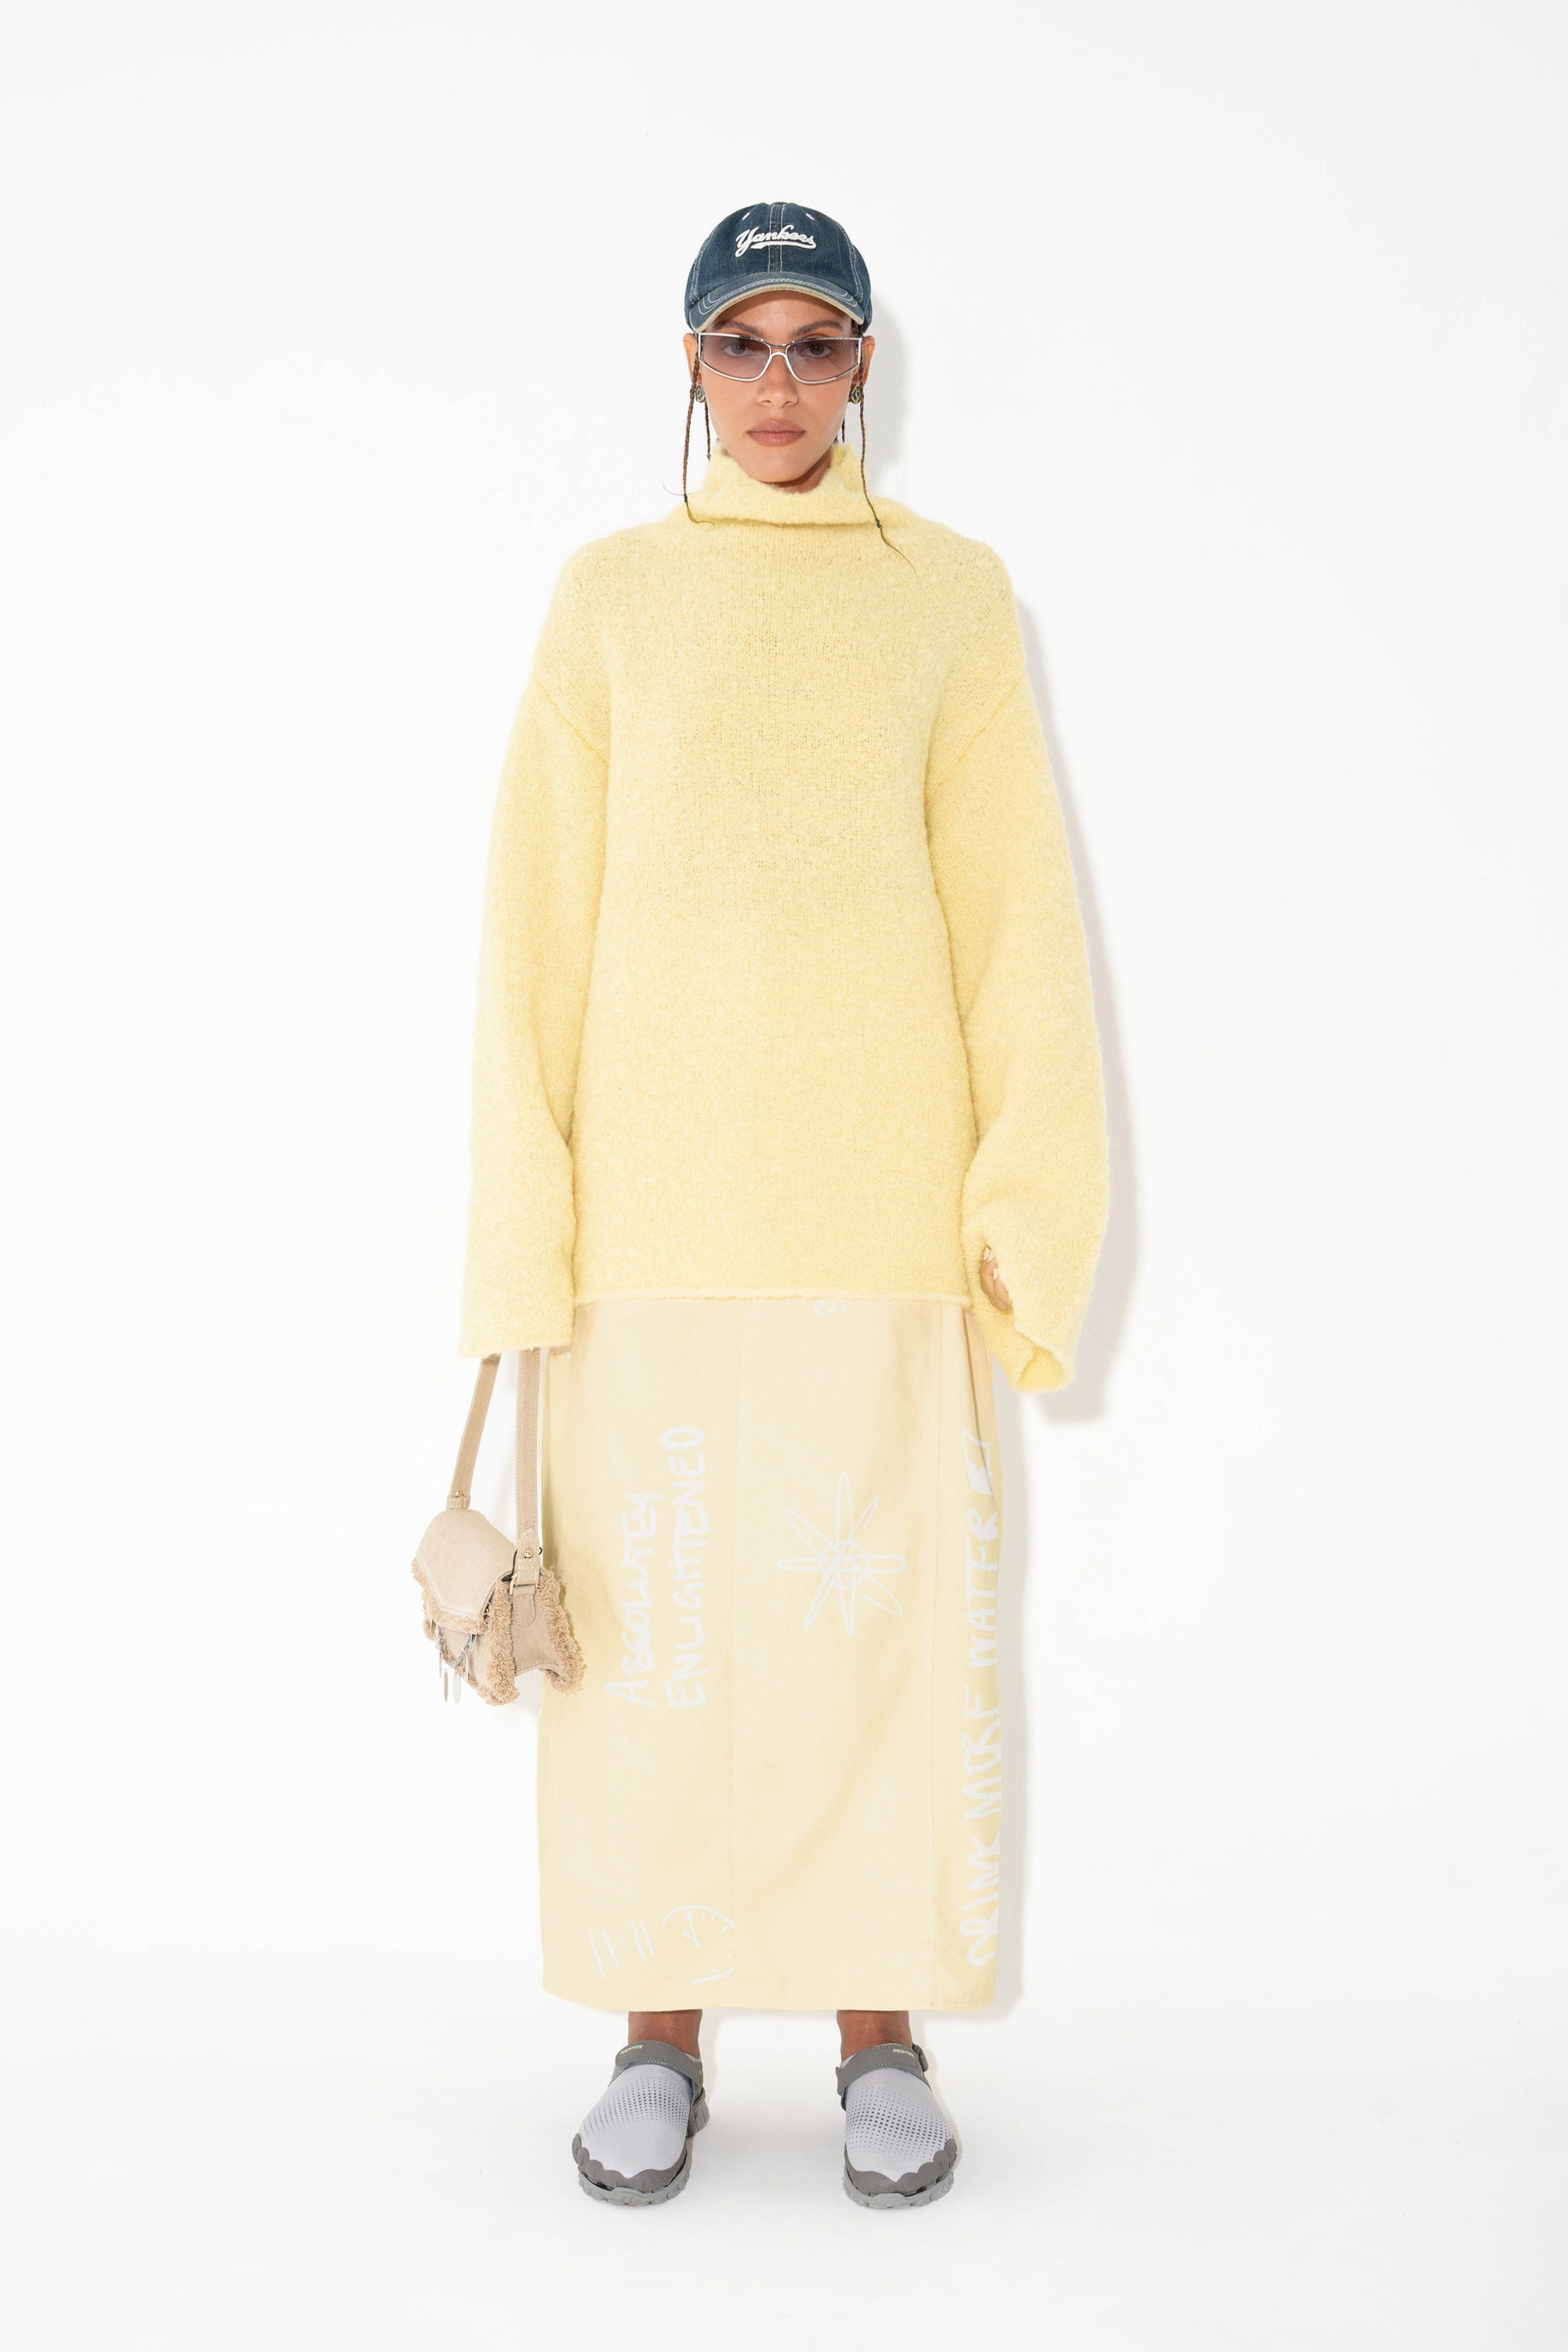 Arthur Apparel Oversized Fluffy Yellow Knitted Sweater